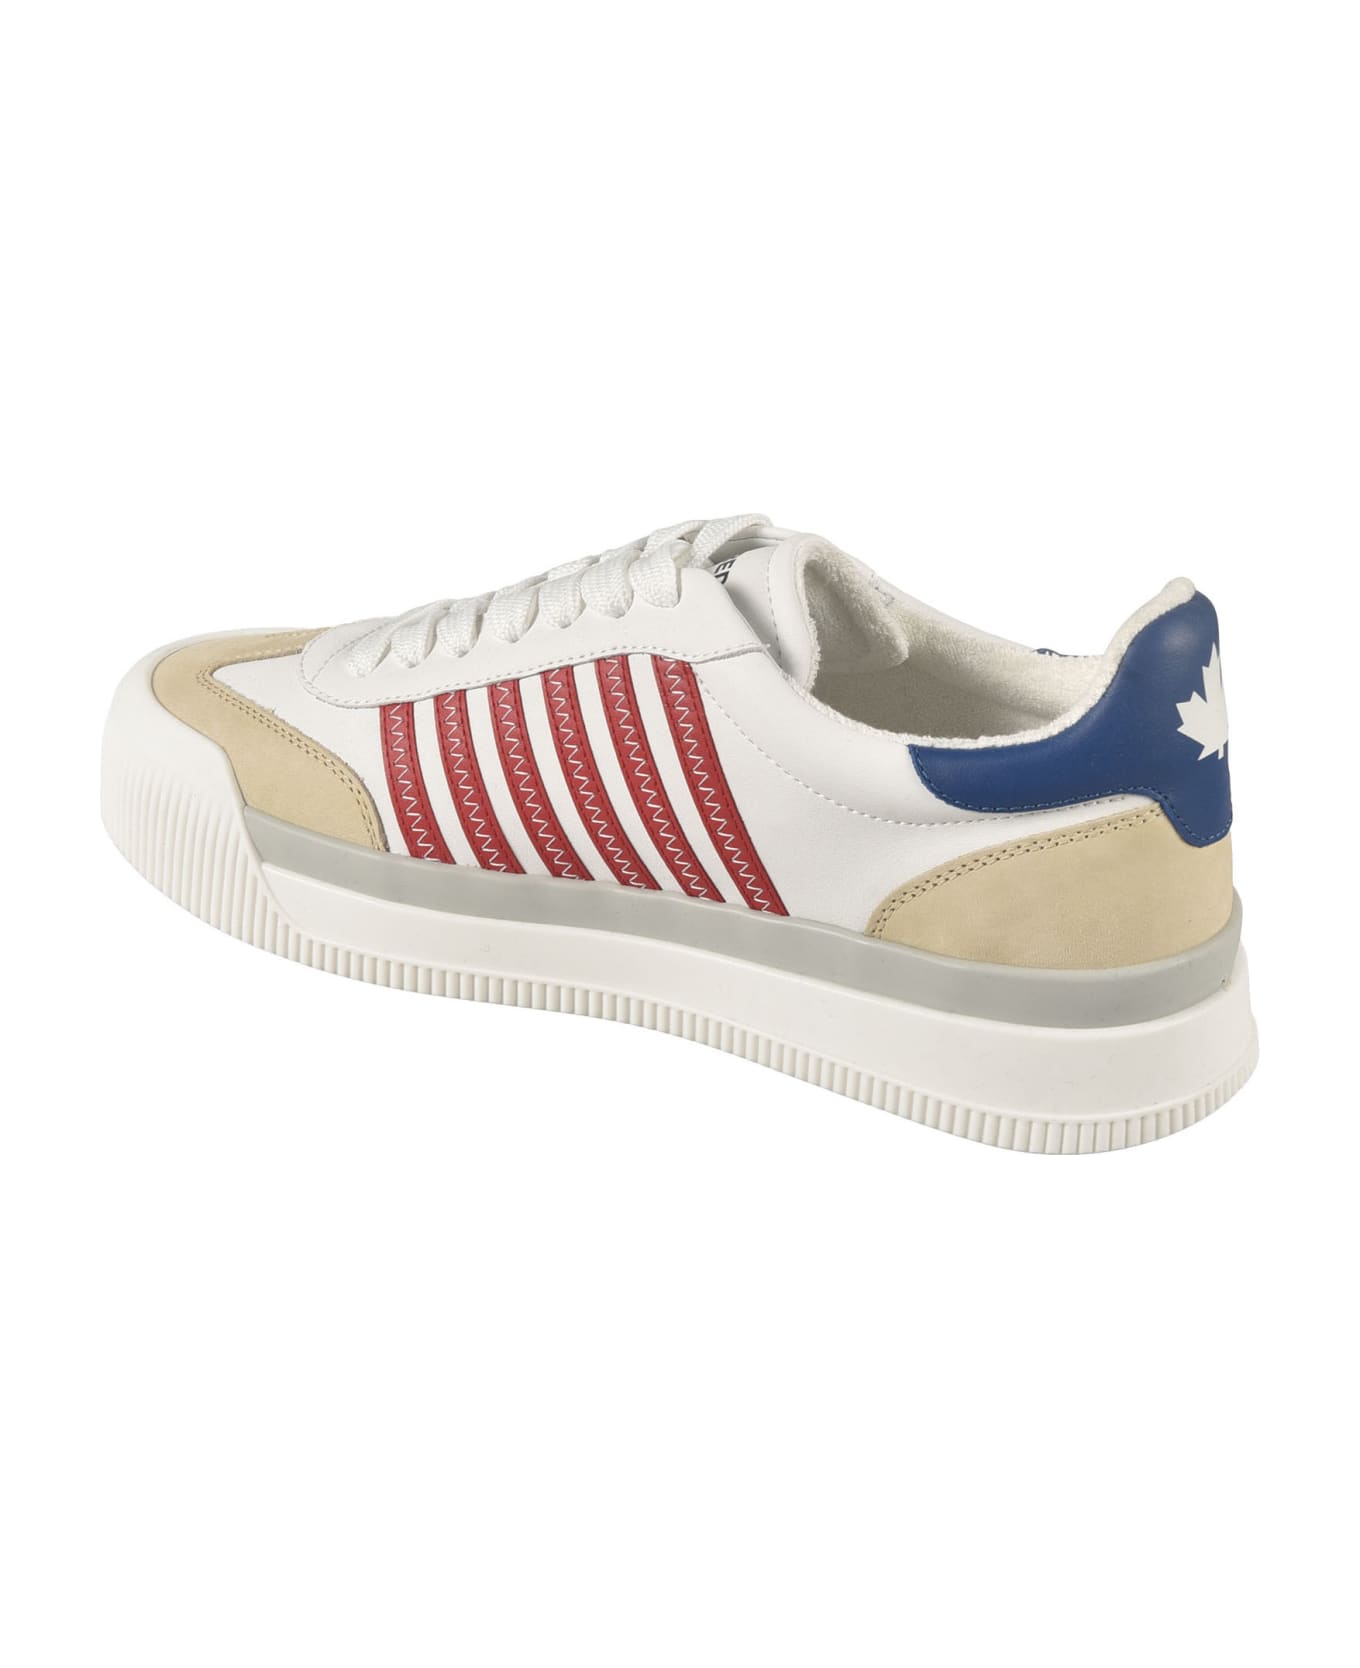 Dsquared2 New Jersey Sneakers - White/Red/Blue